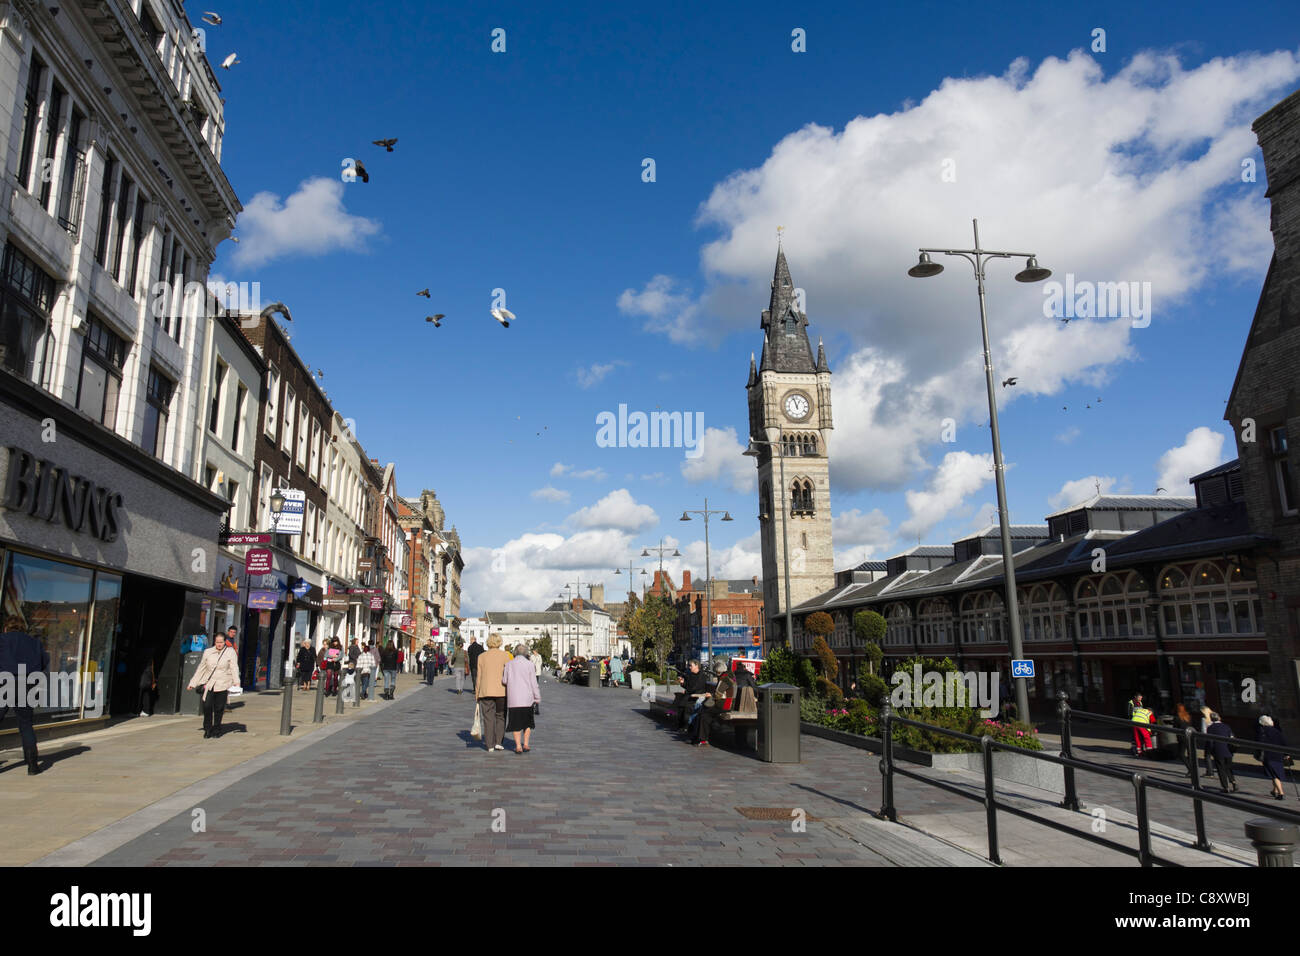 Darlington, north-east England: town centre with Binns store, old market building and clock tower. Stock Photo